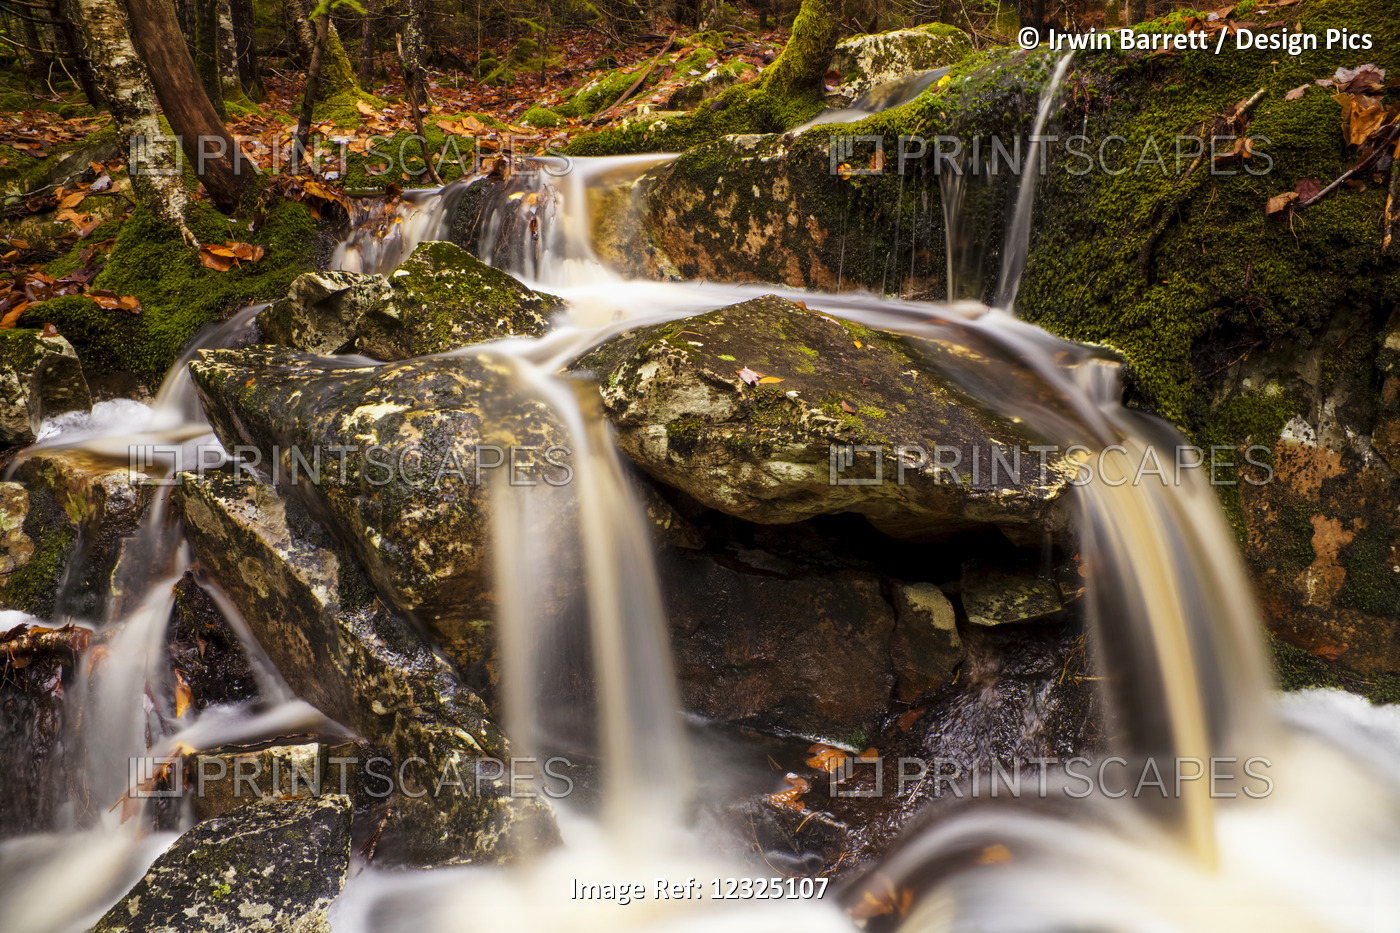 Small Waterfall In The Woods In Autumn; Bedford, Nova Scotia, Canada